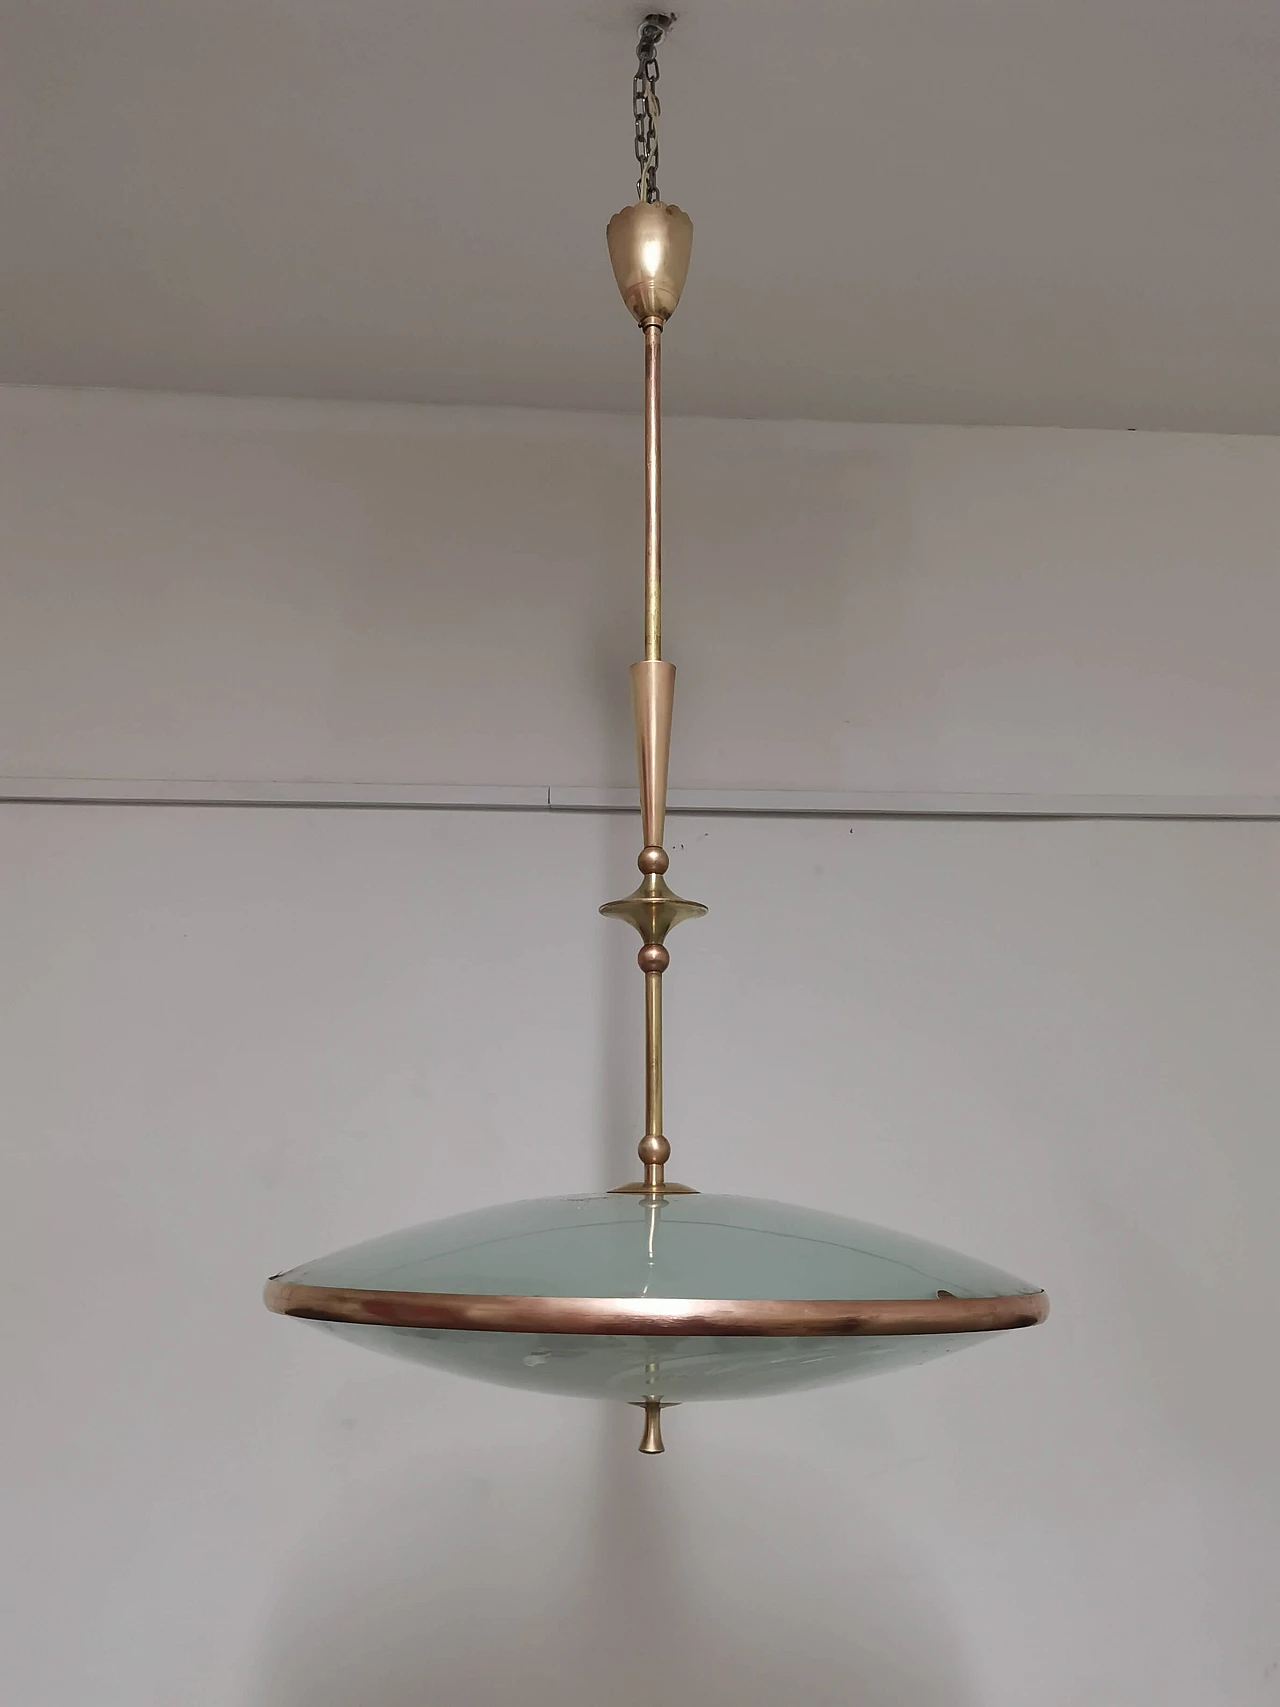 Suspension lamp by Pietro Chiesa for Fontana Arte, 1940s 1372284